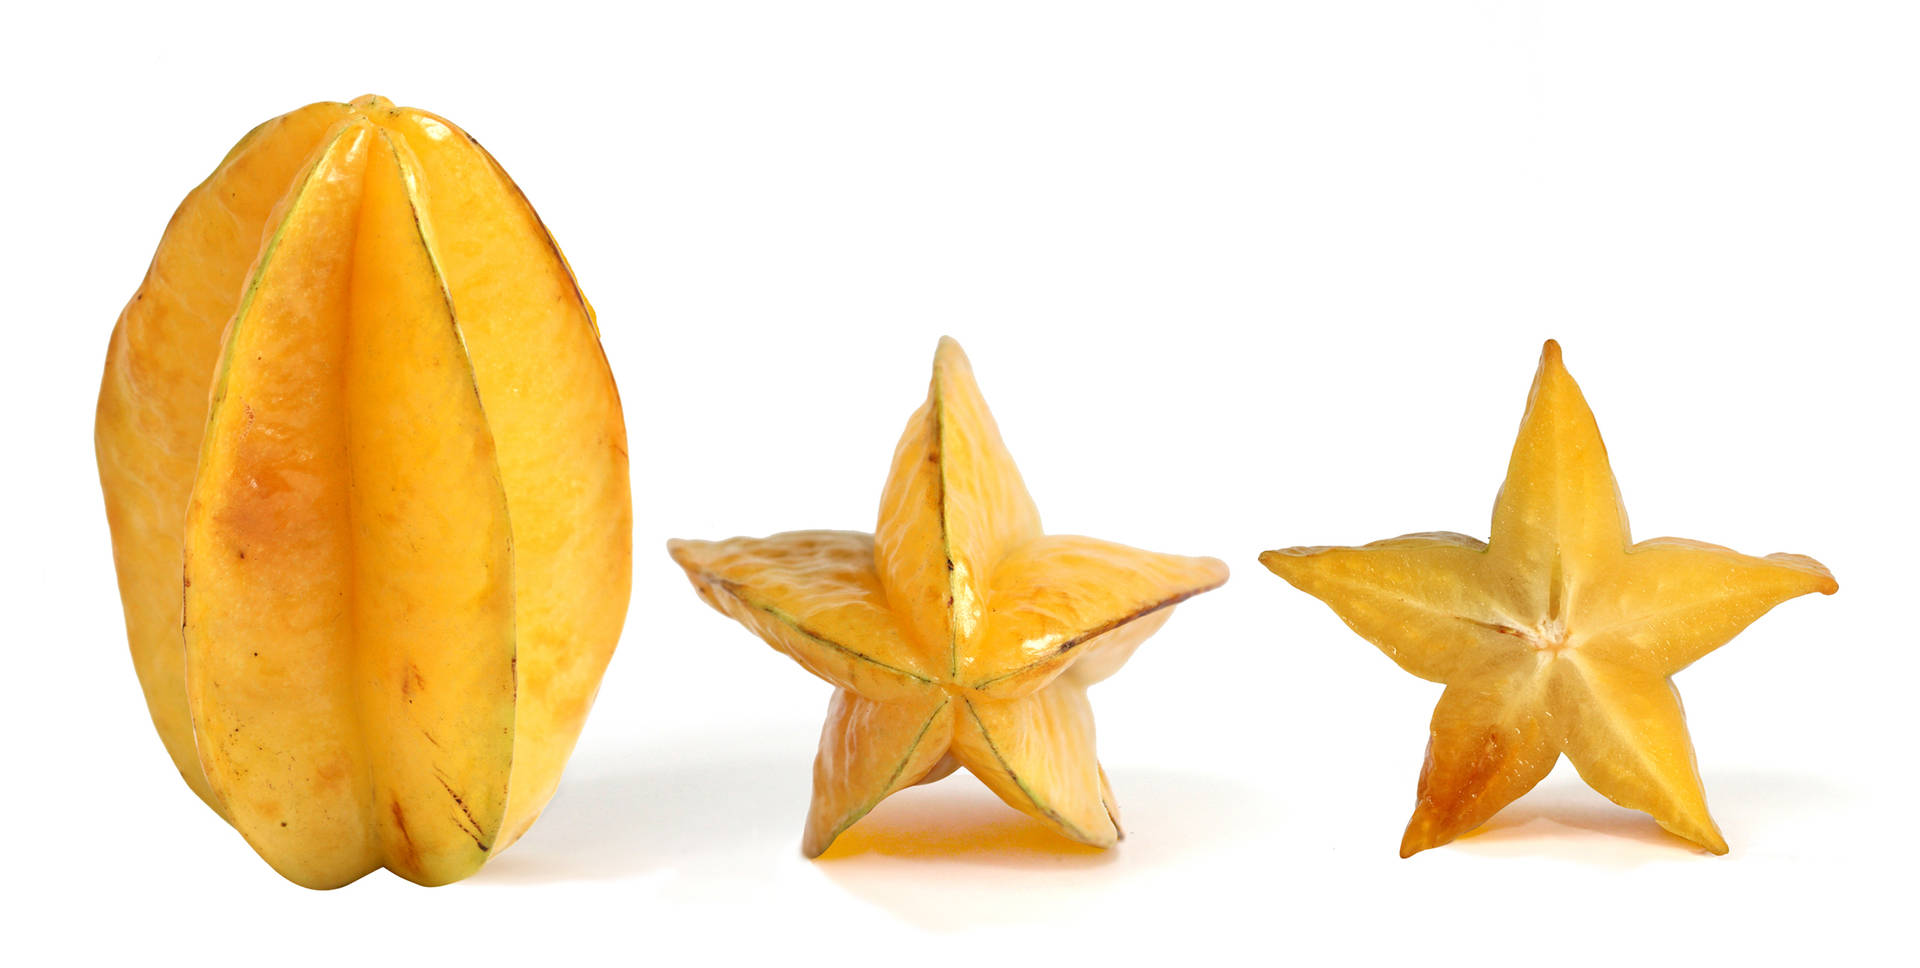 Yellow Star Fruit Slices Background